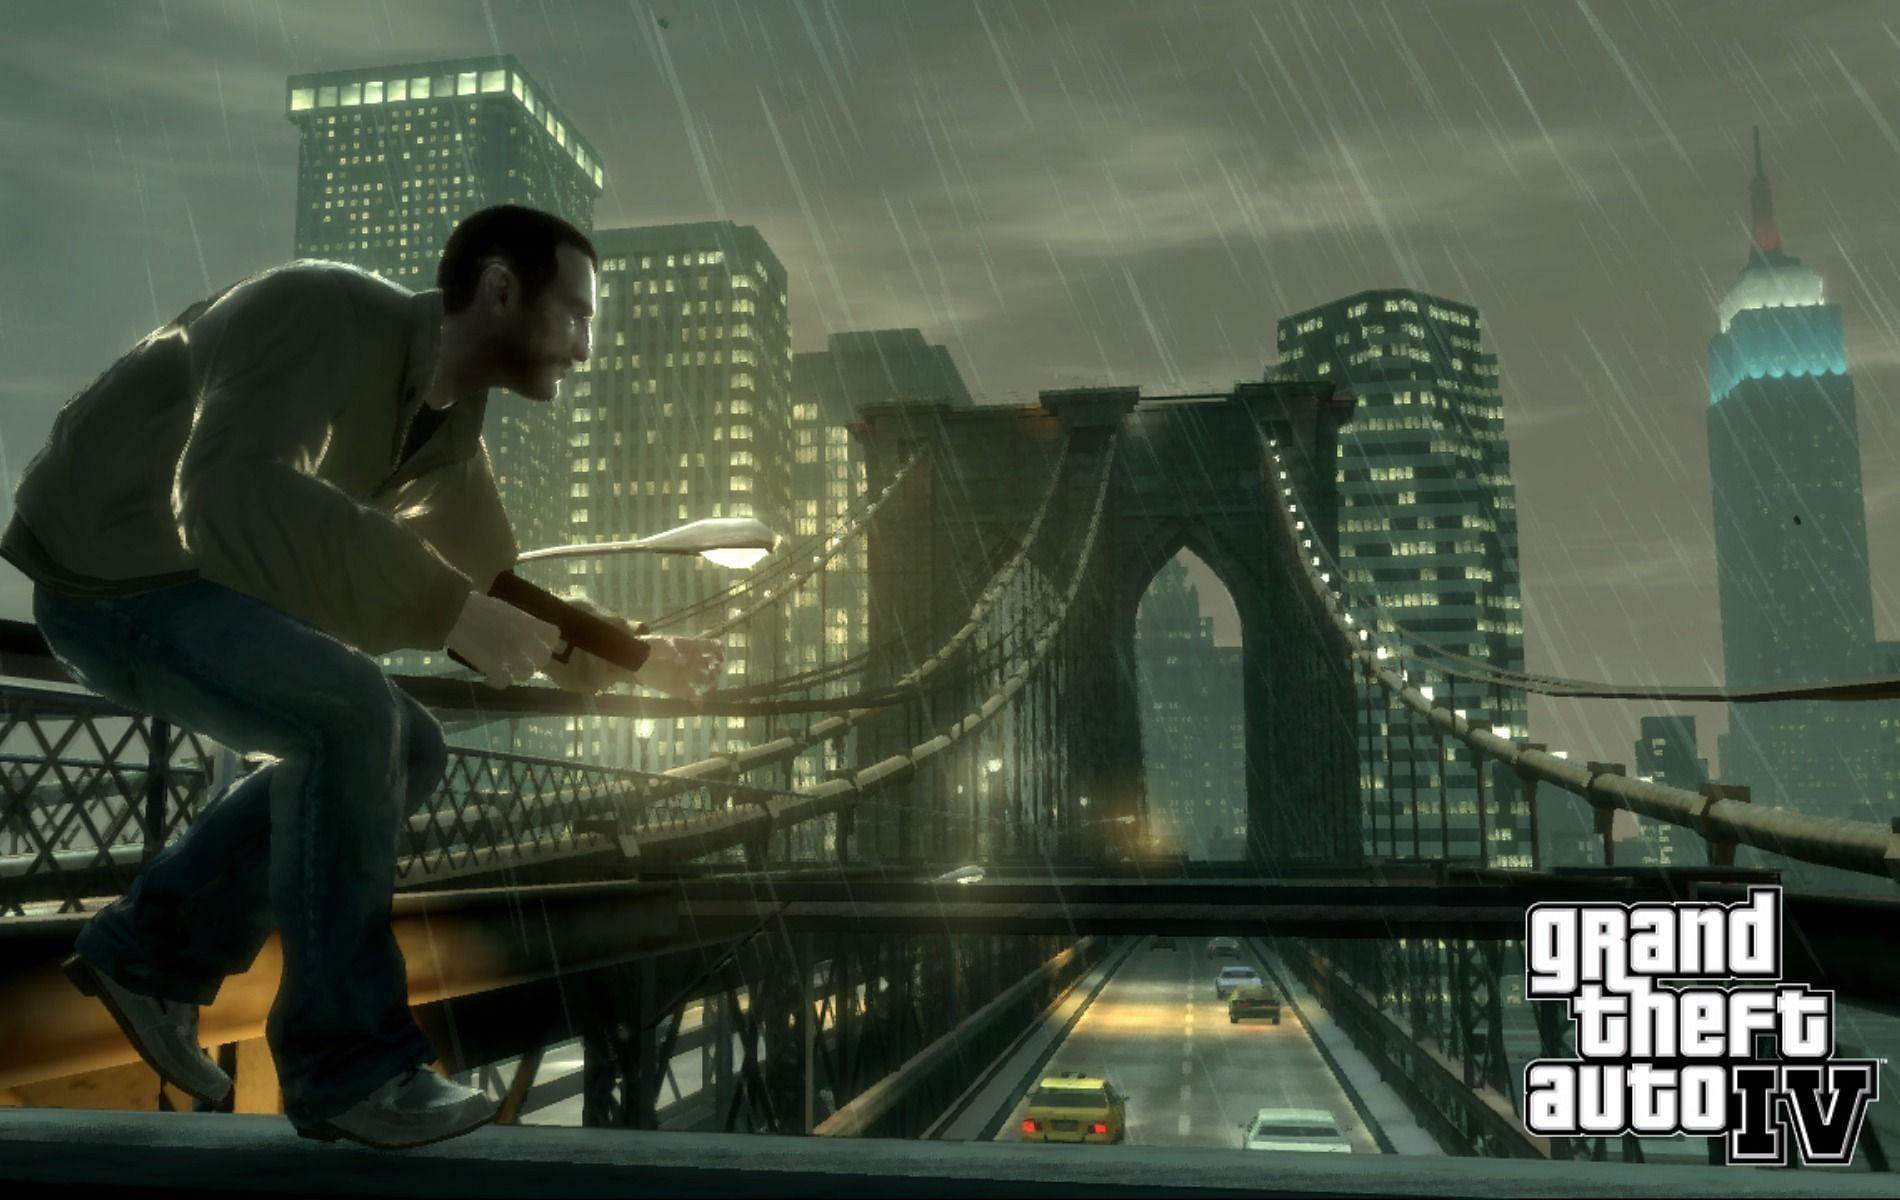 Fact: GTA 4 is the highest-rated GTA title and the third highest